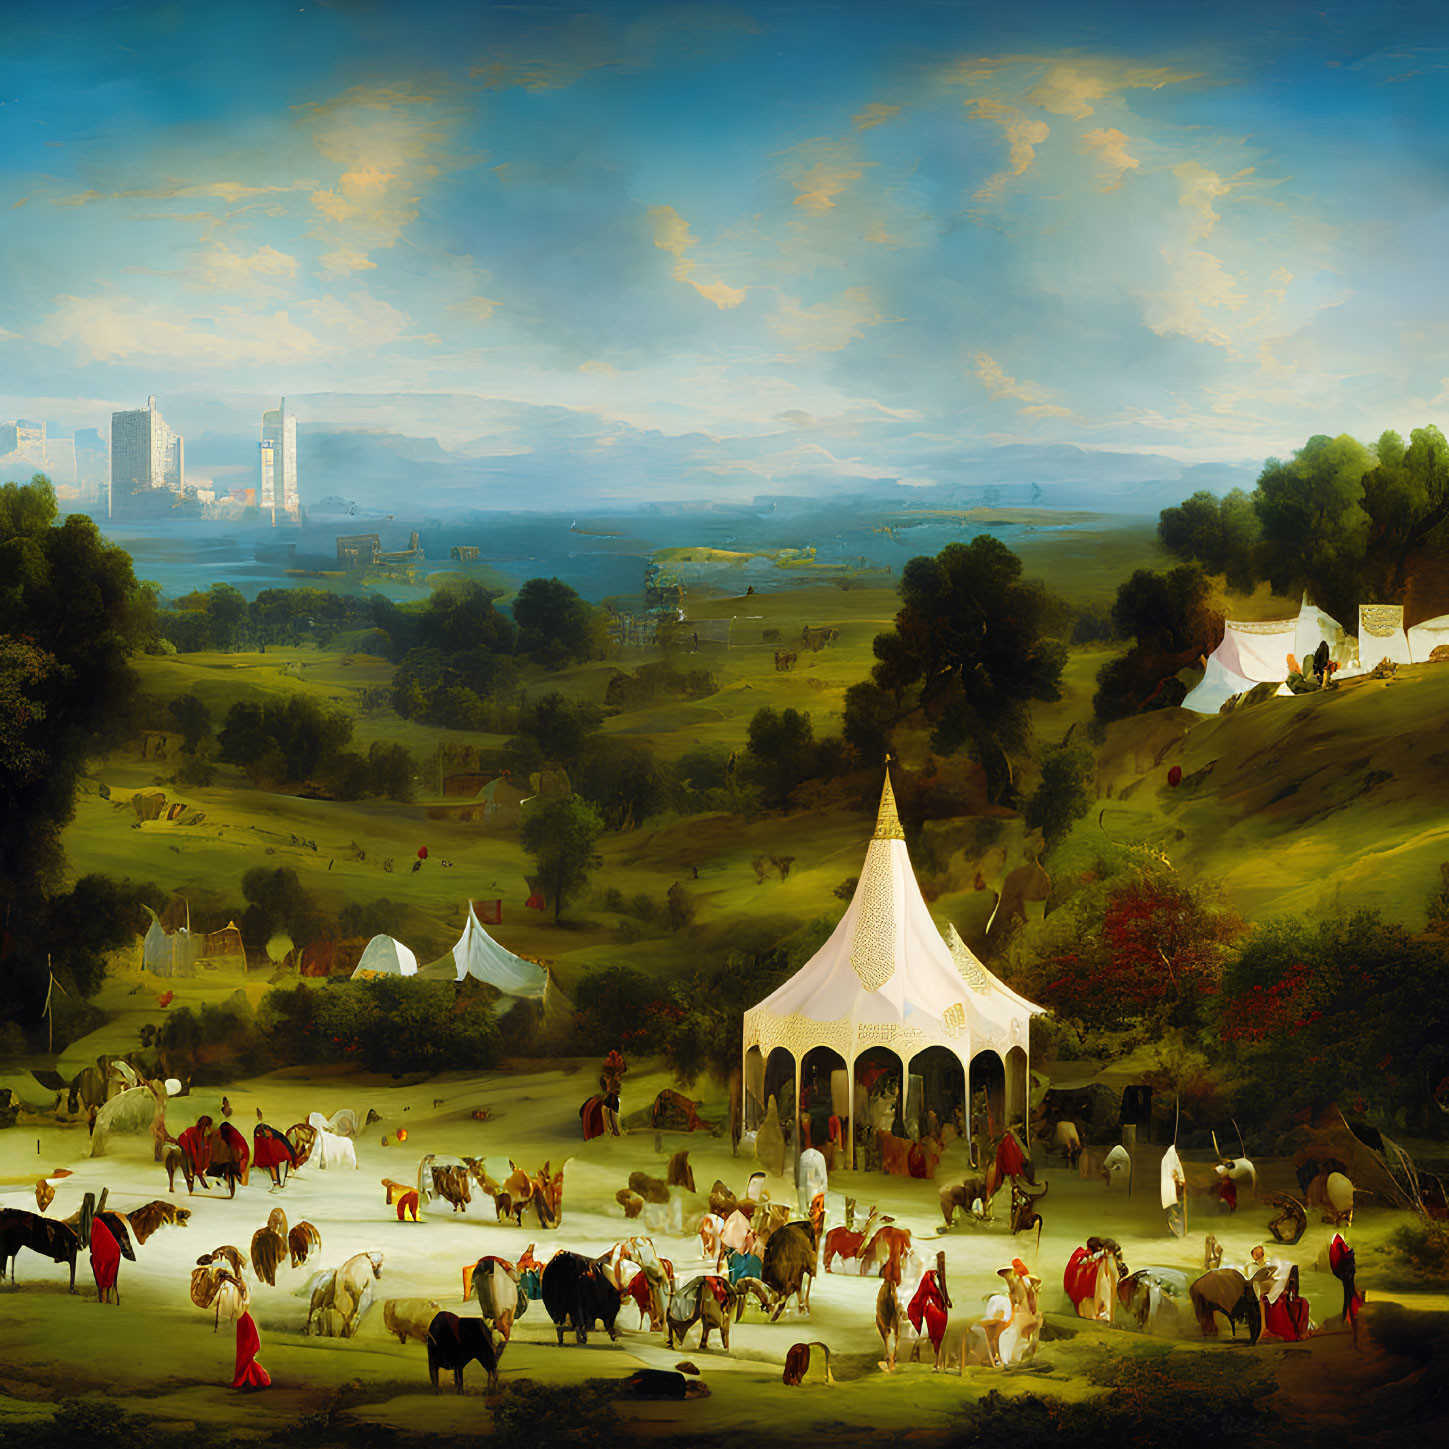 Pastoral landscape painting with classical and modern elements